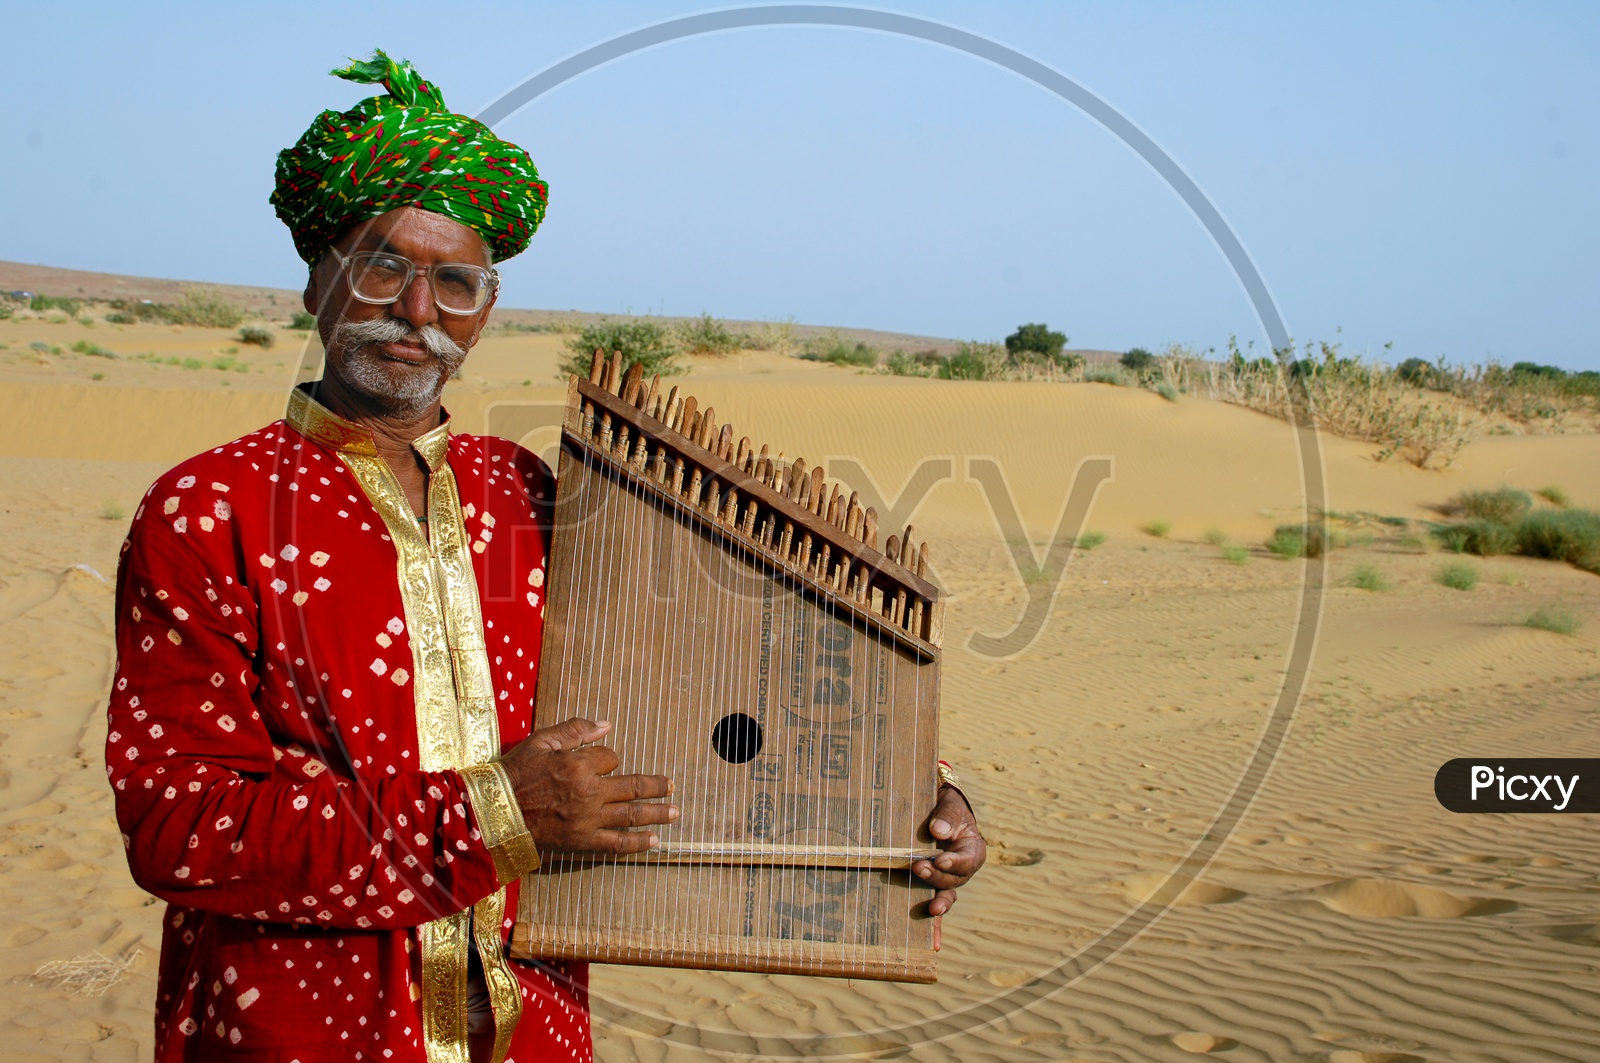 Rajasthani Man playing a musical instrument in the desert